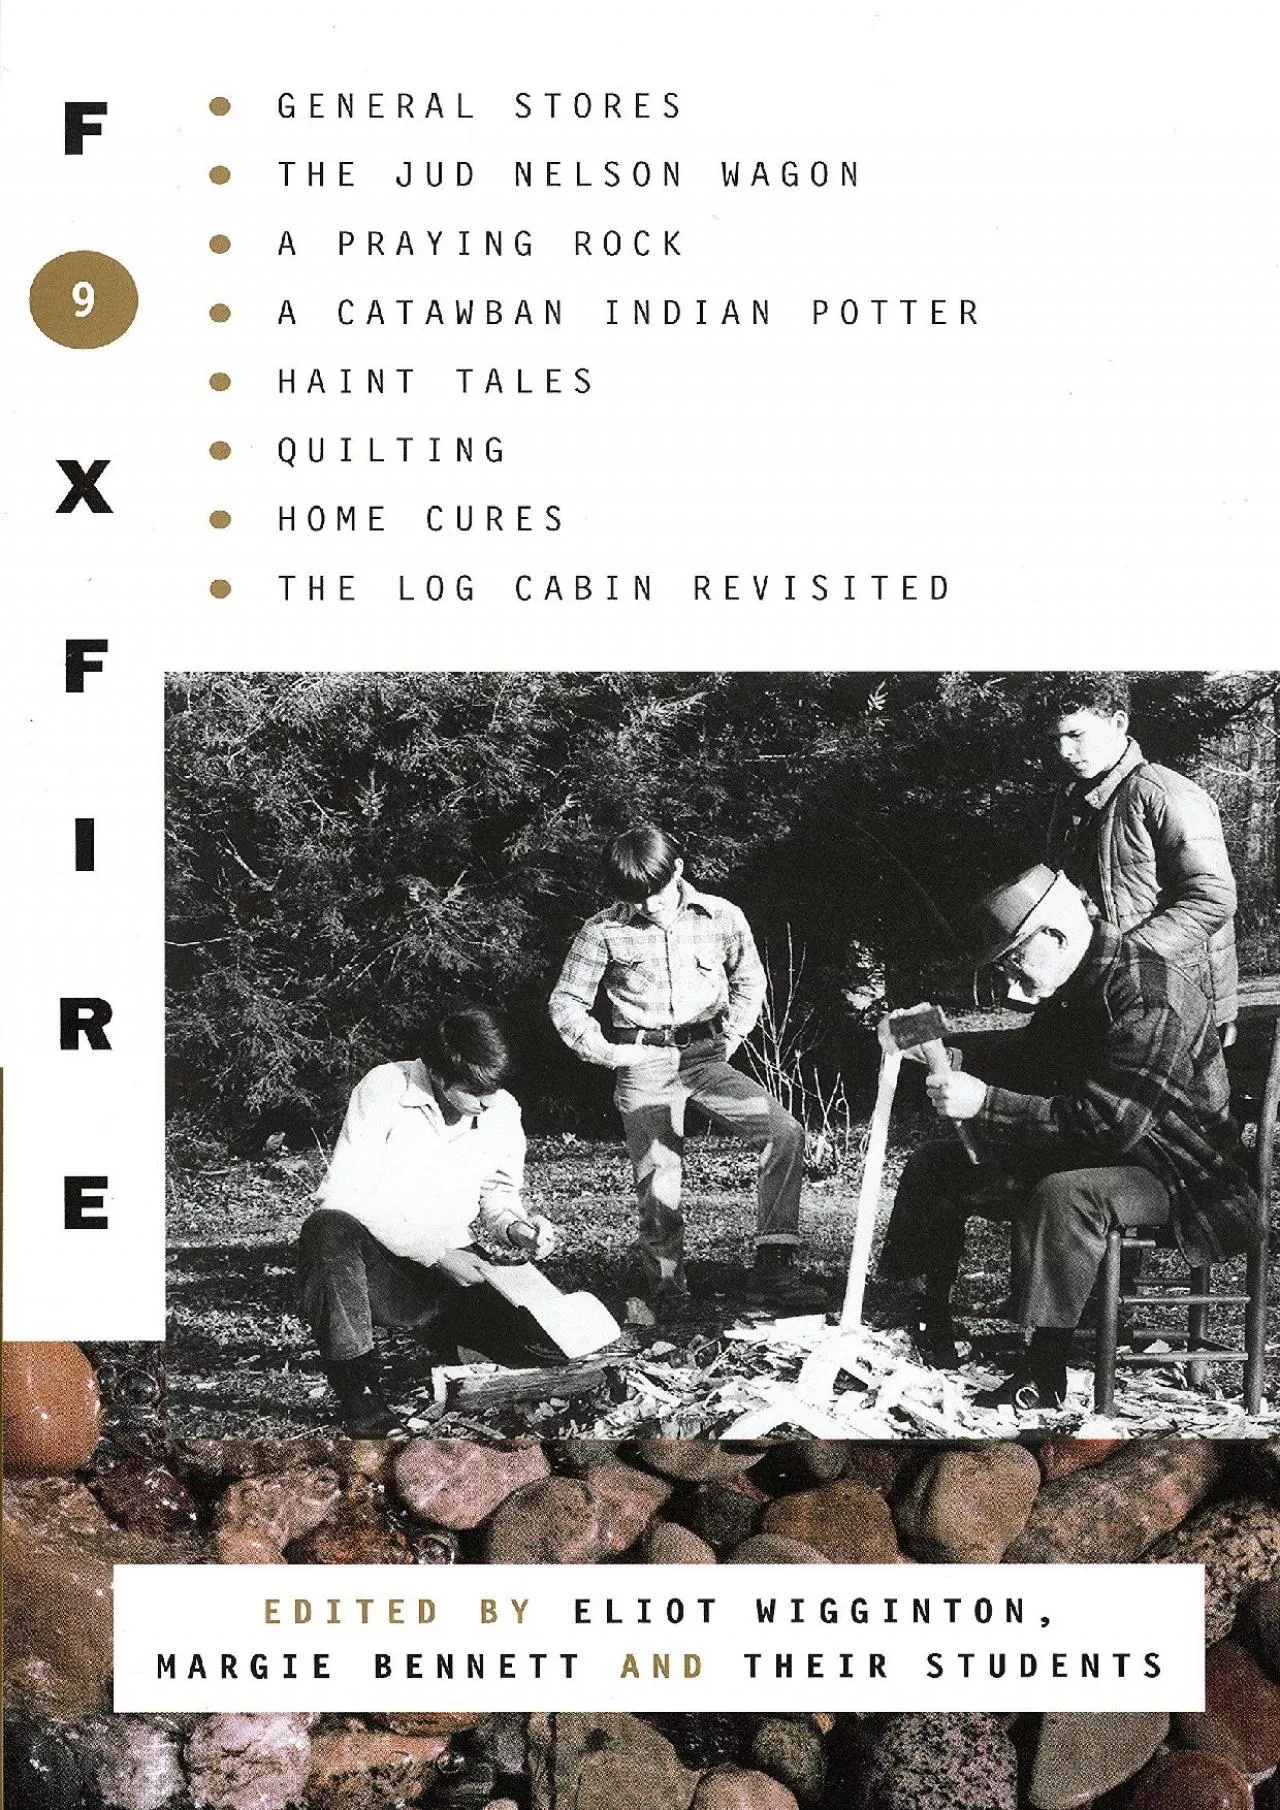 (READ)-Foxfire 9: General Stores, The Jud Nelson Wagon, A Praying Rock, A Catawban Indian